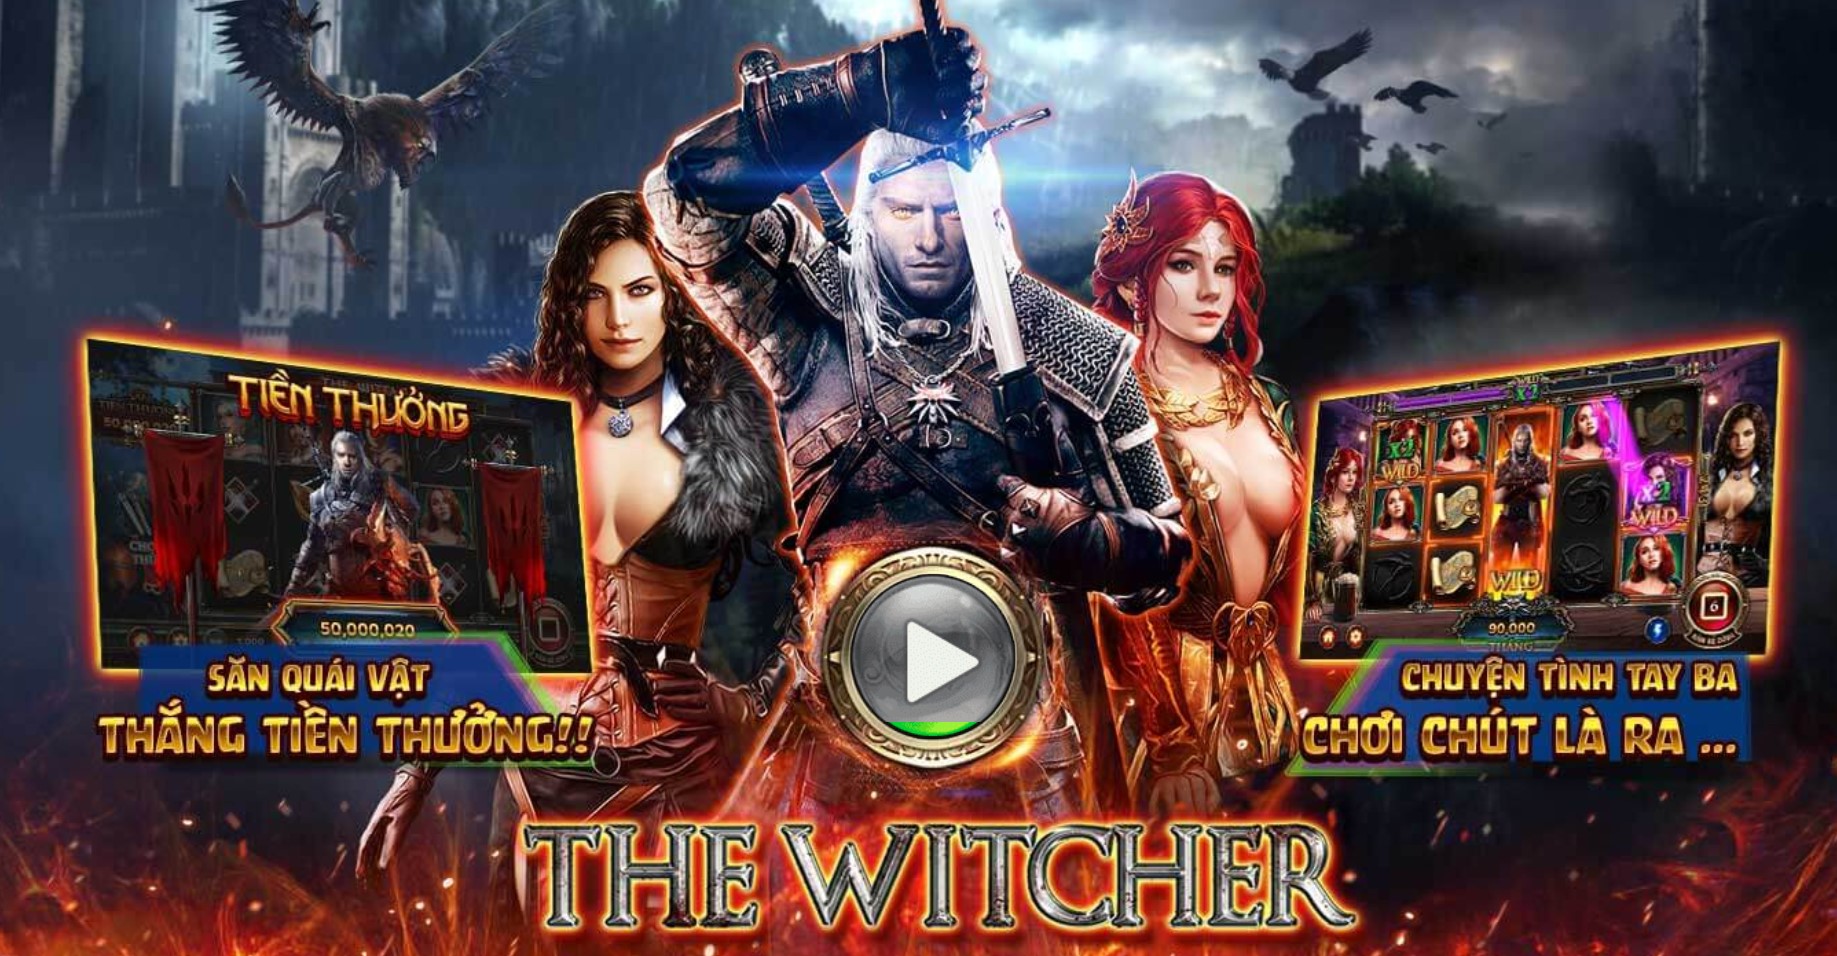 Giới thiệu game The Witcher cổng game Go88 